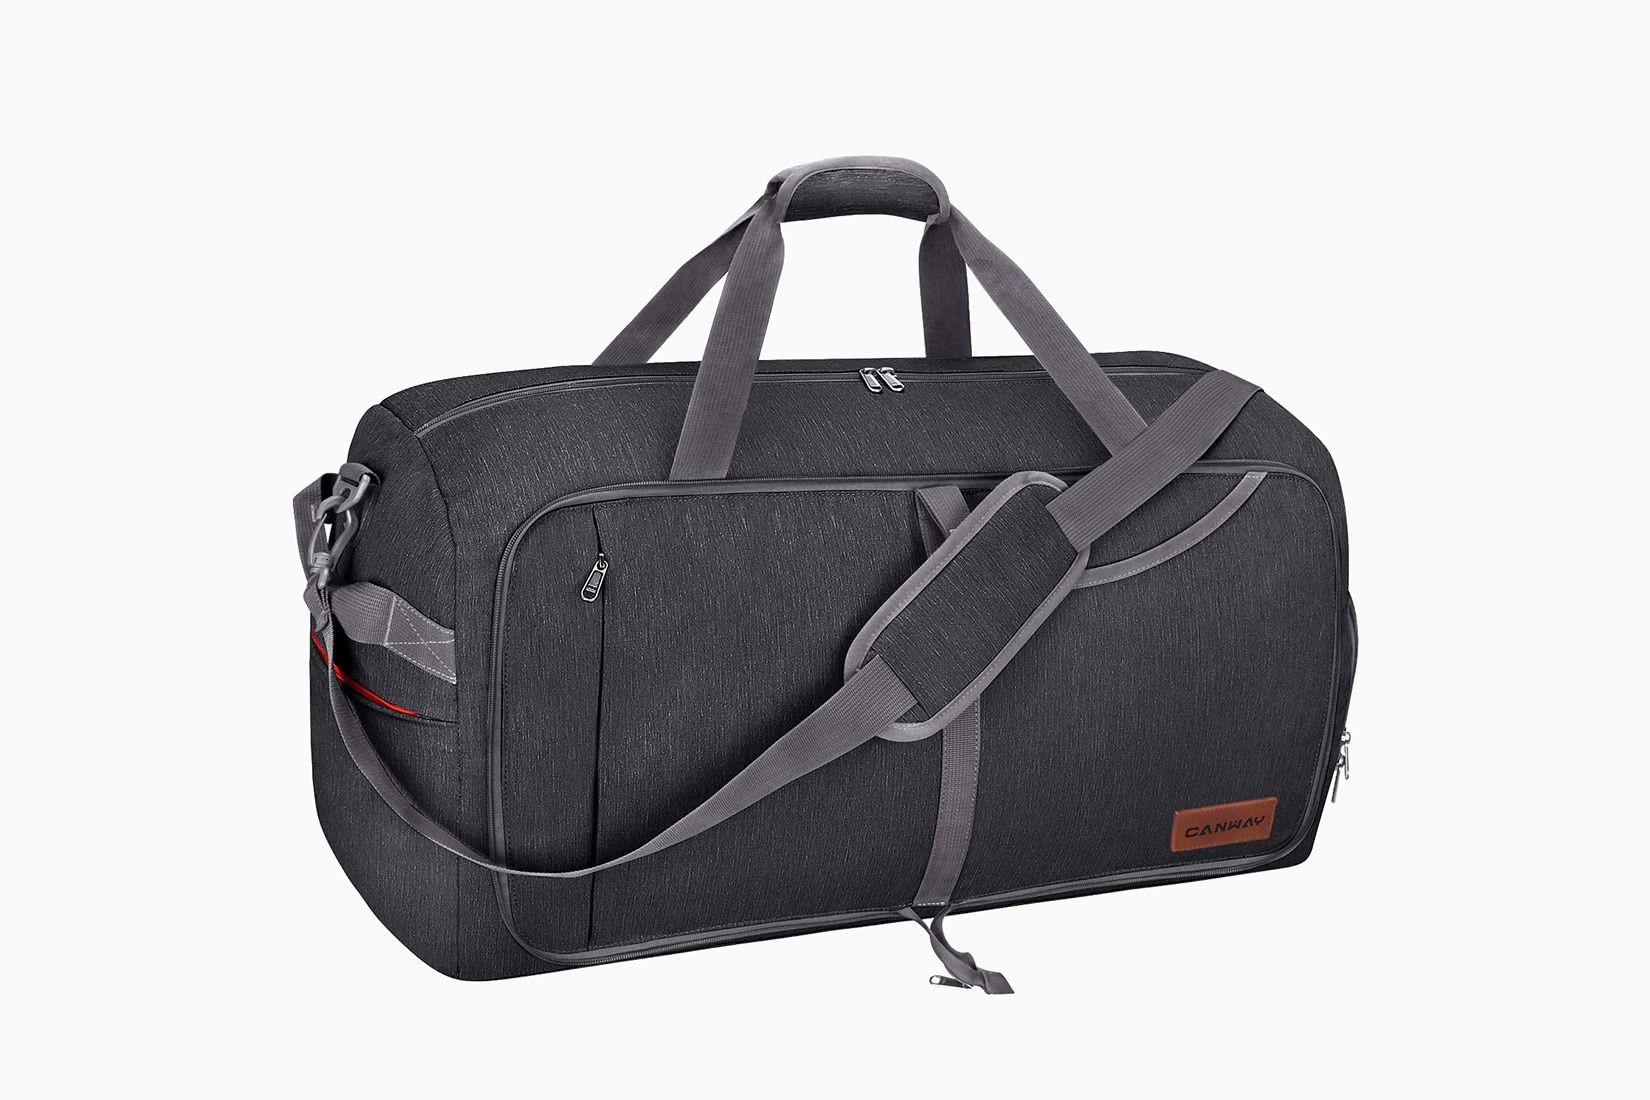 The Best Duffel Bags of 2020: Stylish and Durable